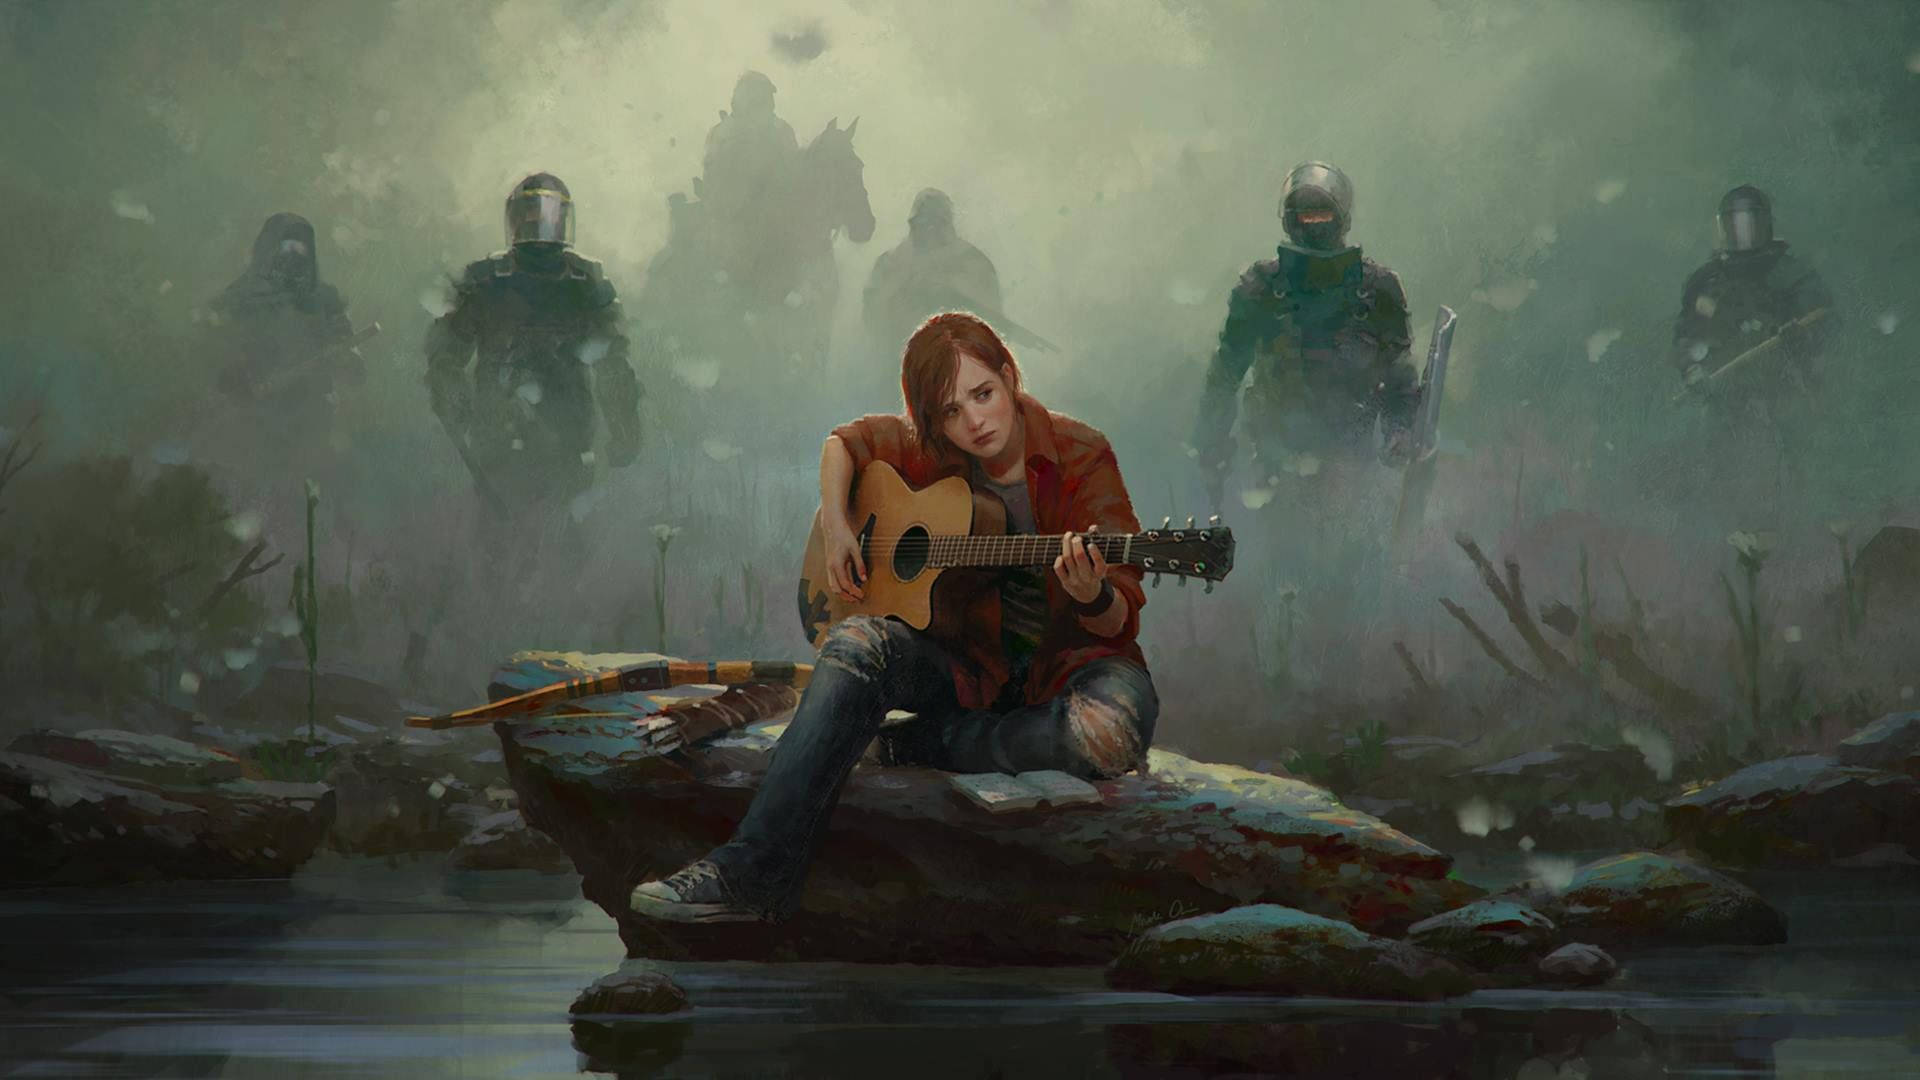 Ellie And Her Guitar The Last Of Us